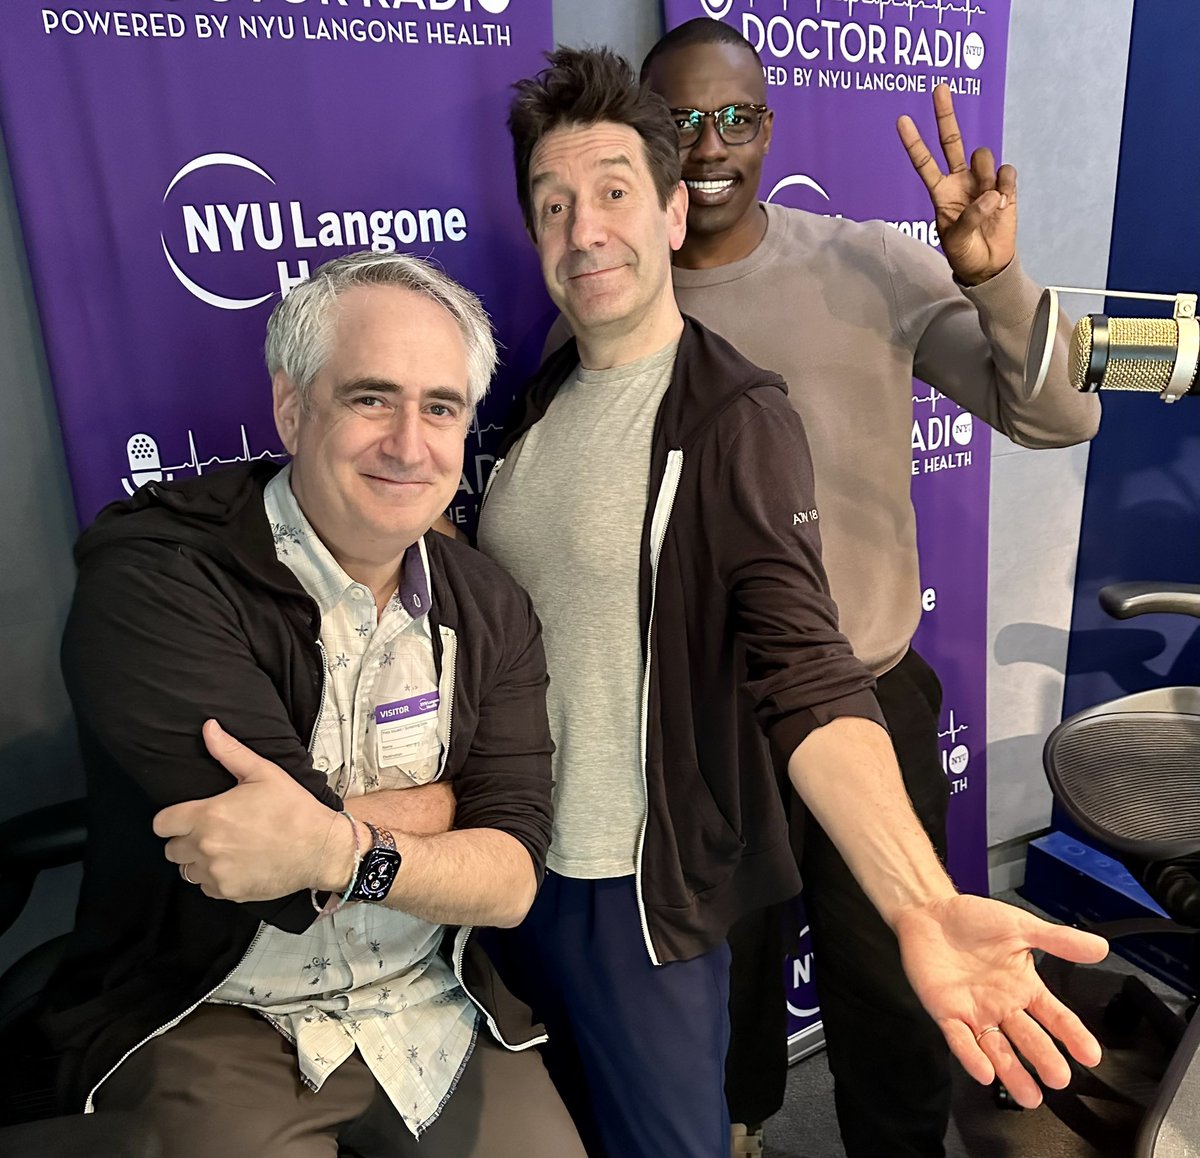 Nothing to sneeze at this Thurs morning (8-10am ET) as the entire ER team sweeps through the studio like a pollen hurricane. @heshiegreshie (left) @askdrbilly (center) & @DoctorDarienMD want to know if you’re suffering this #allergy season & what you’re doing about it? @SIRIUSXM